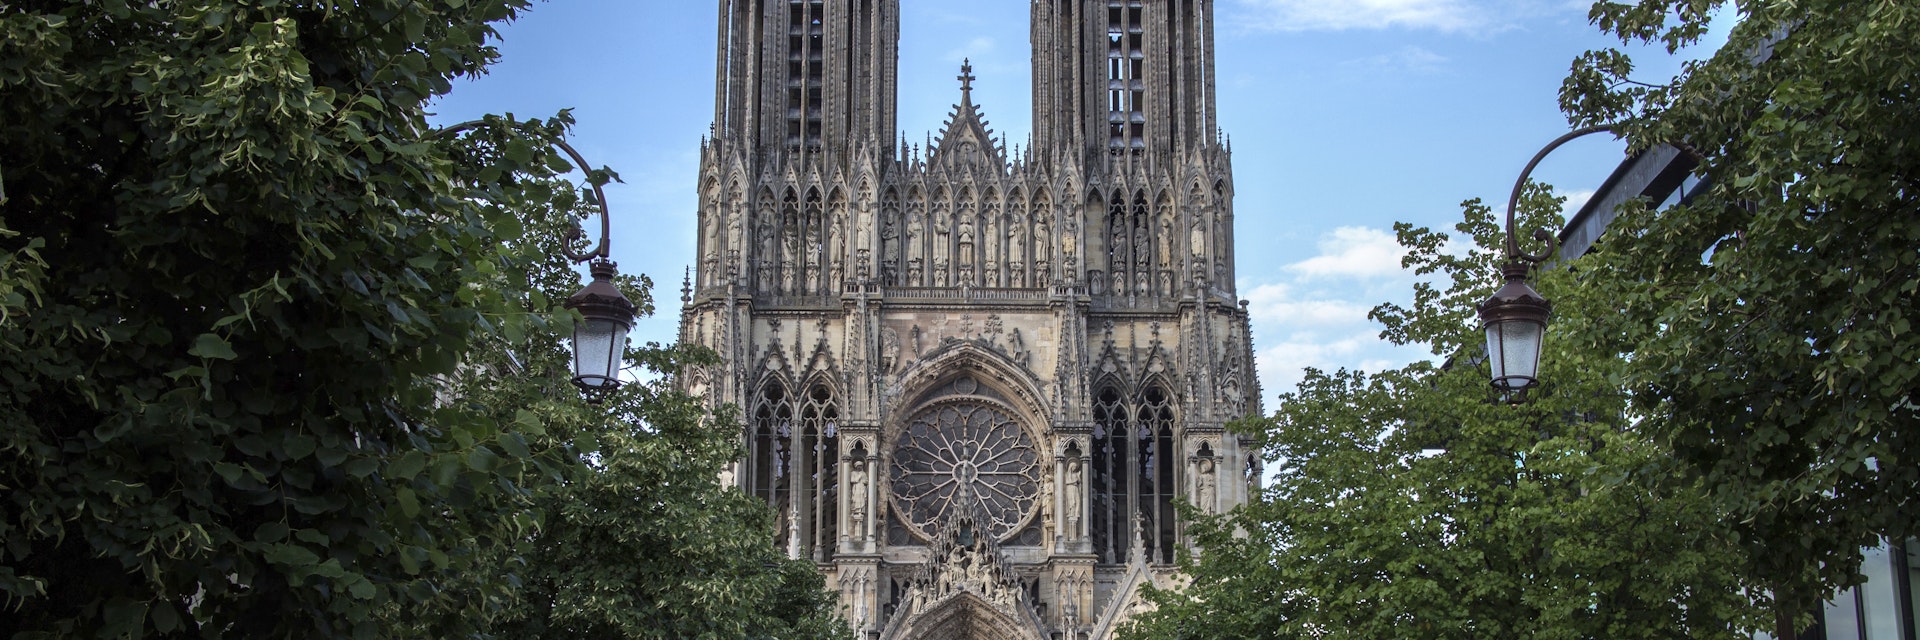 Cathedral Notre Dame in Reims, France